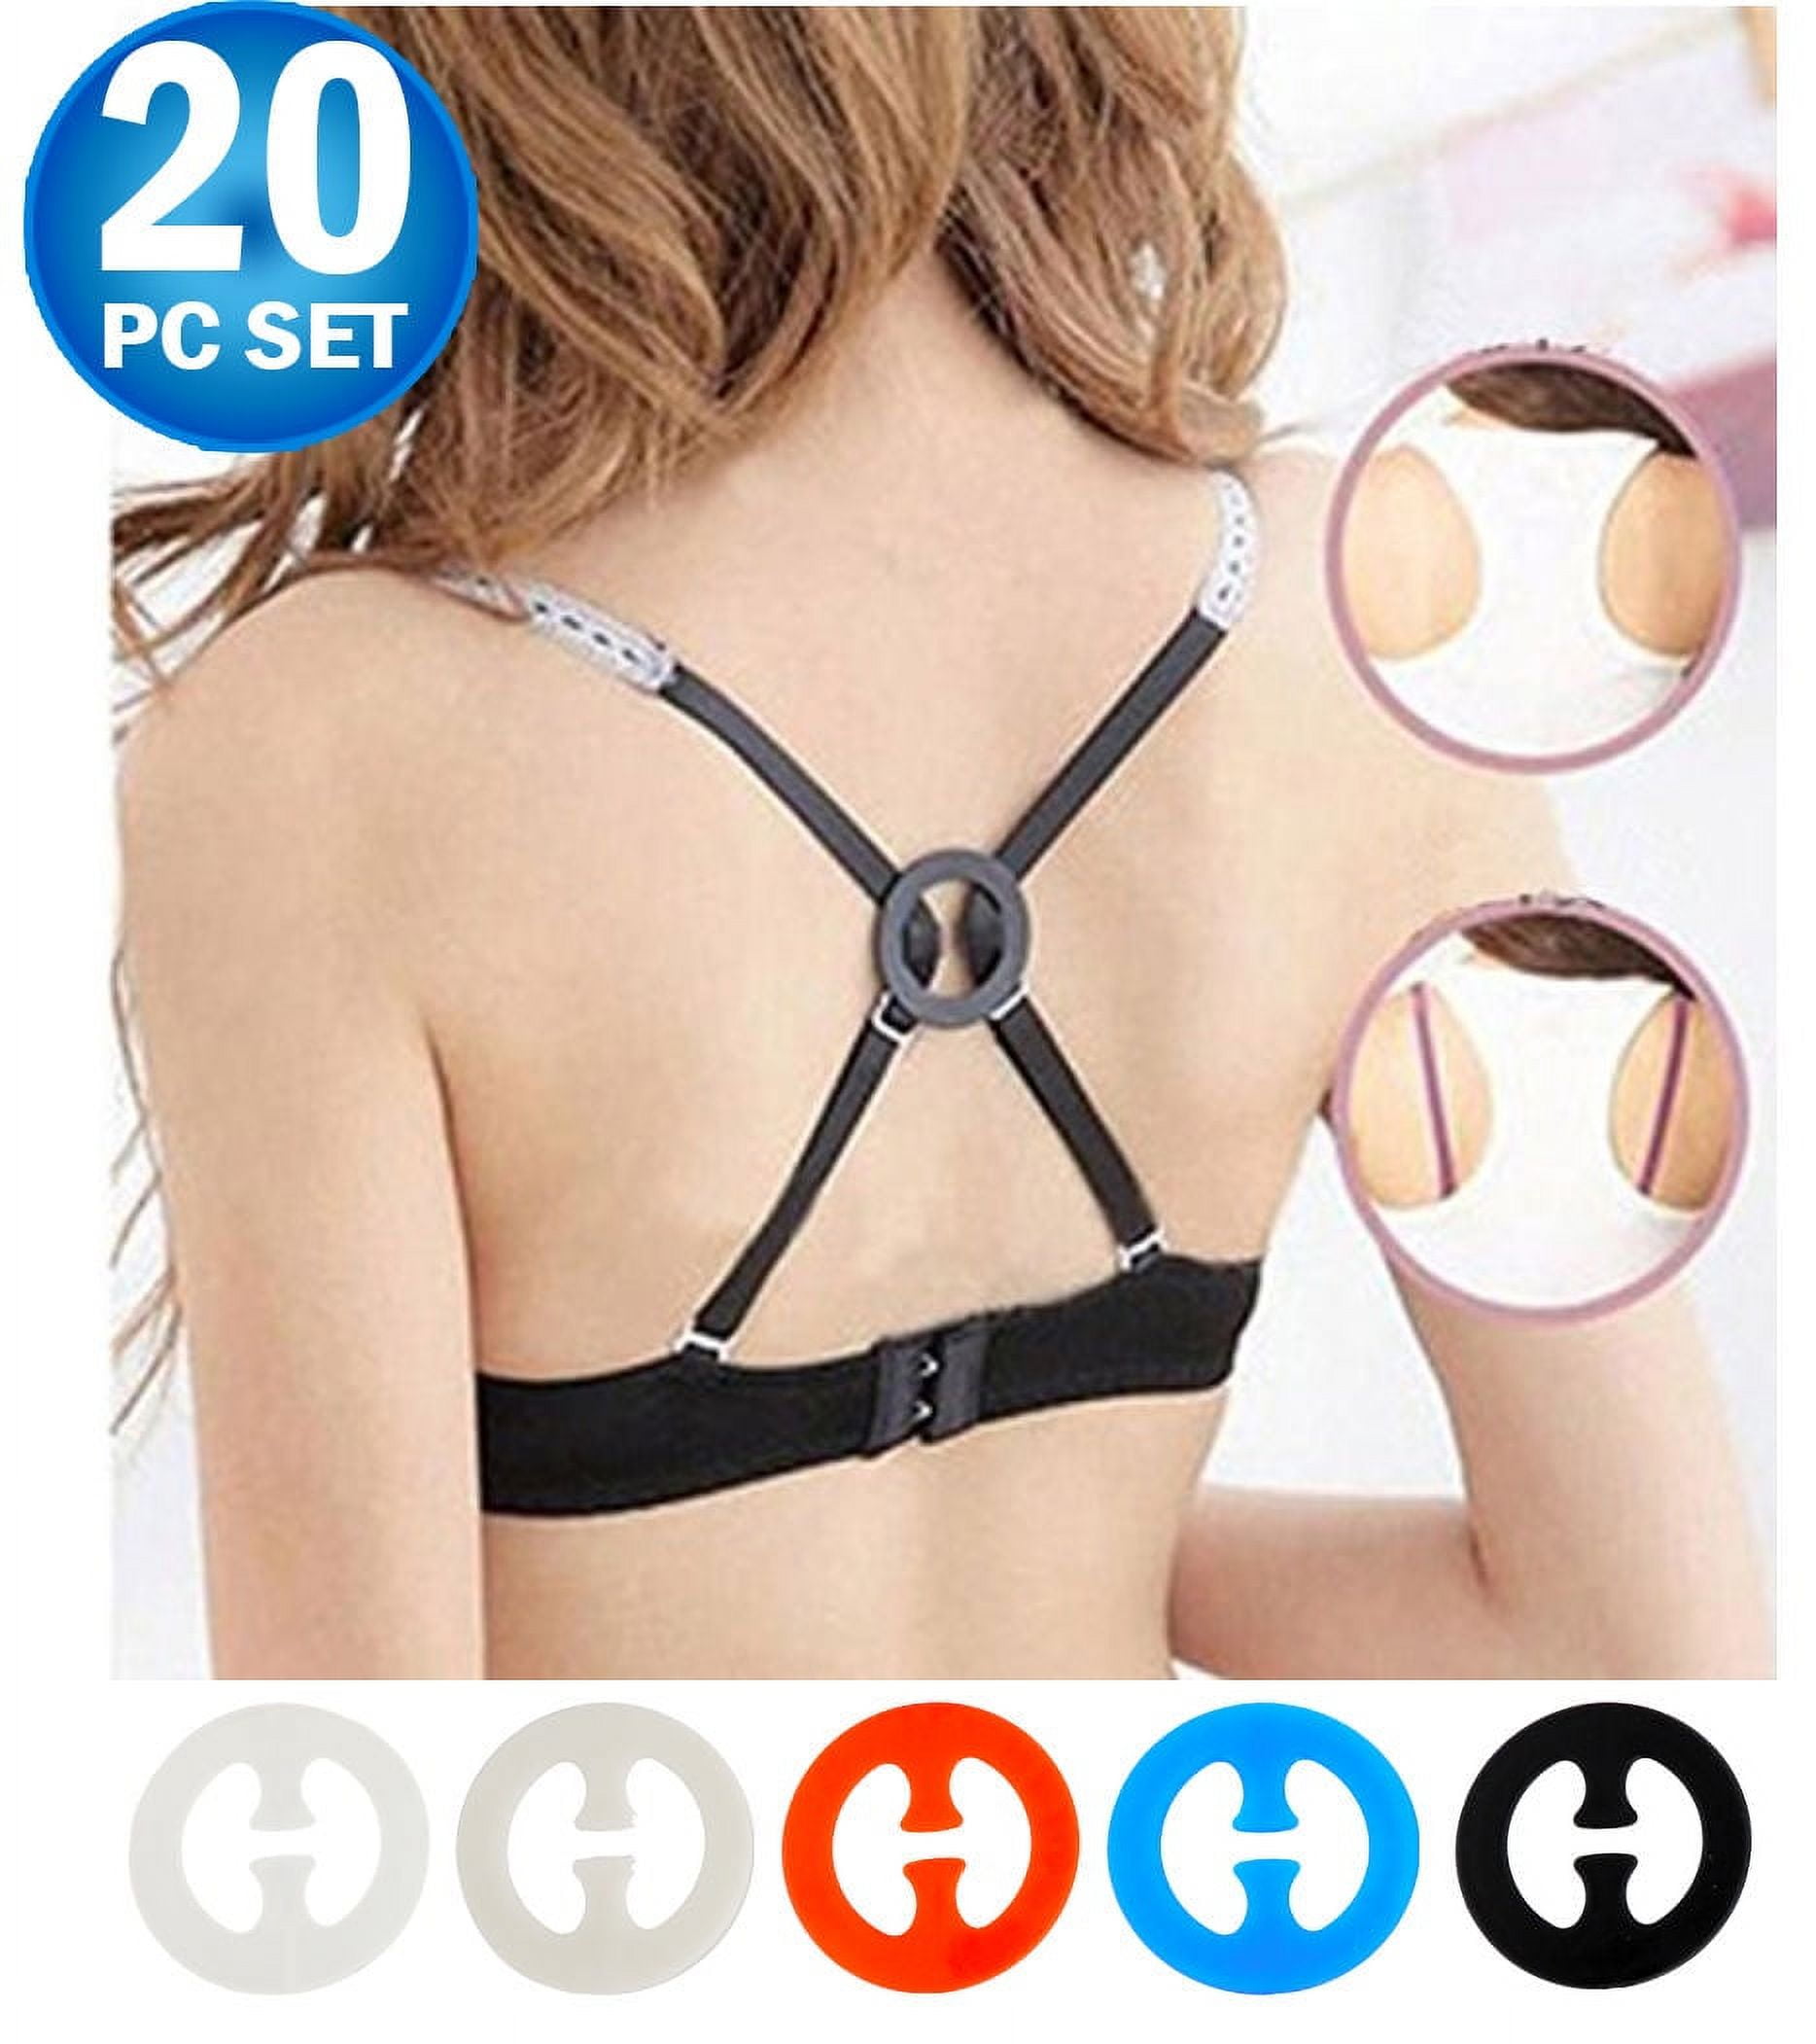 Perfection T Back Bra Converter For Racer Back Fashions 3 Pack